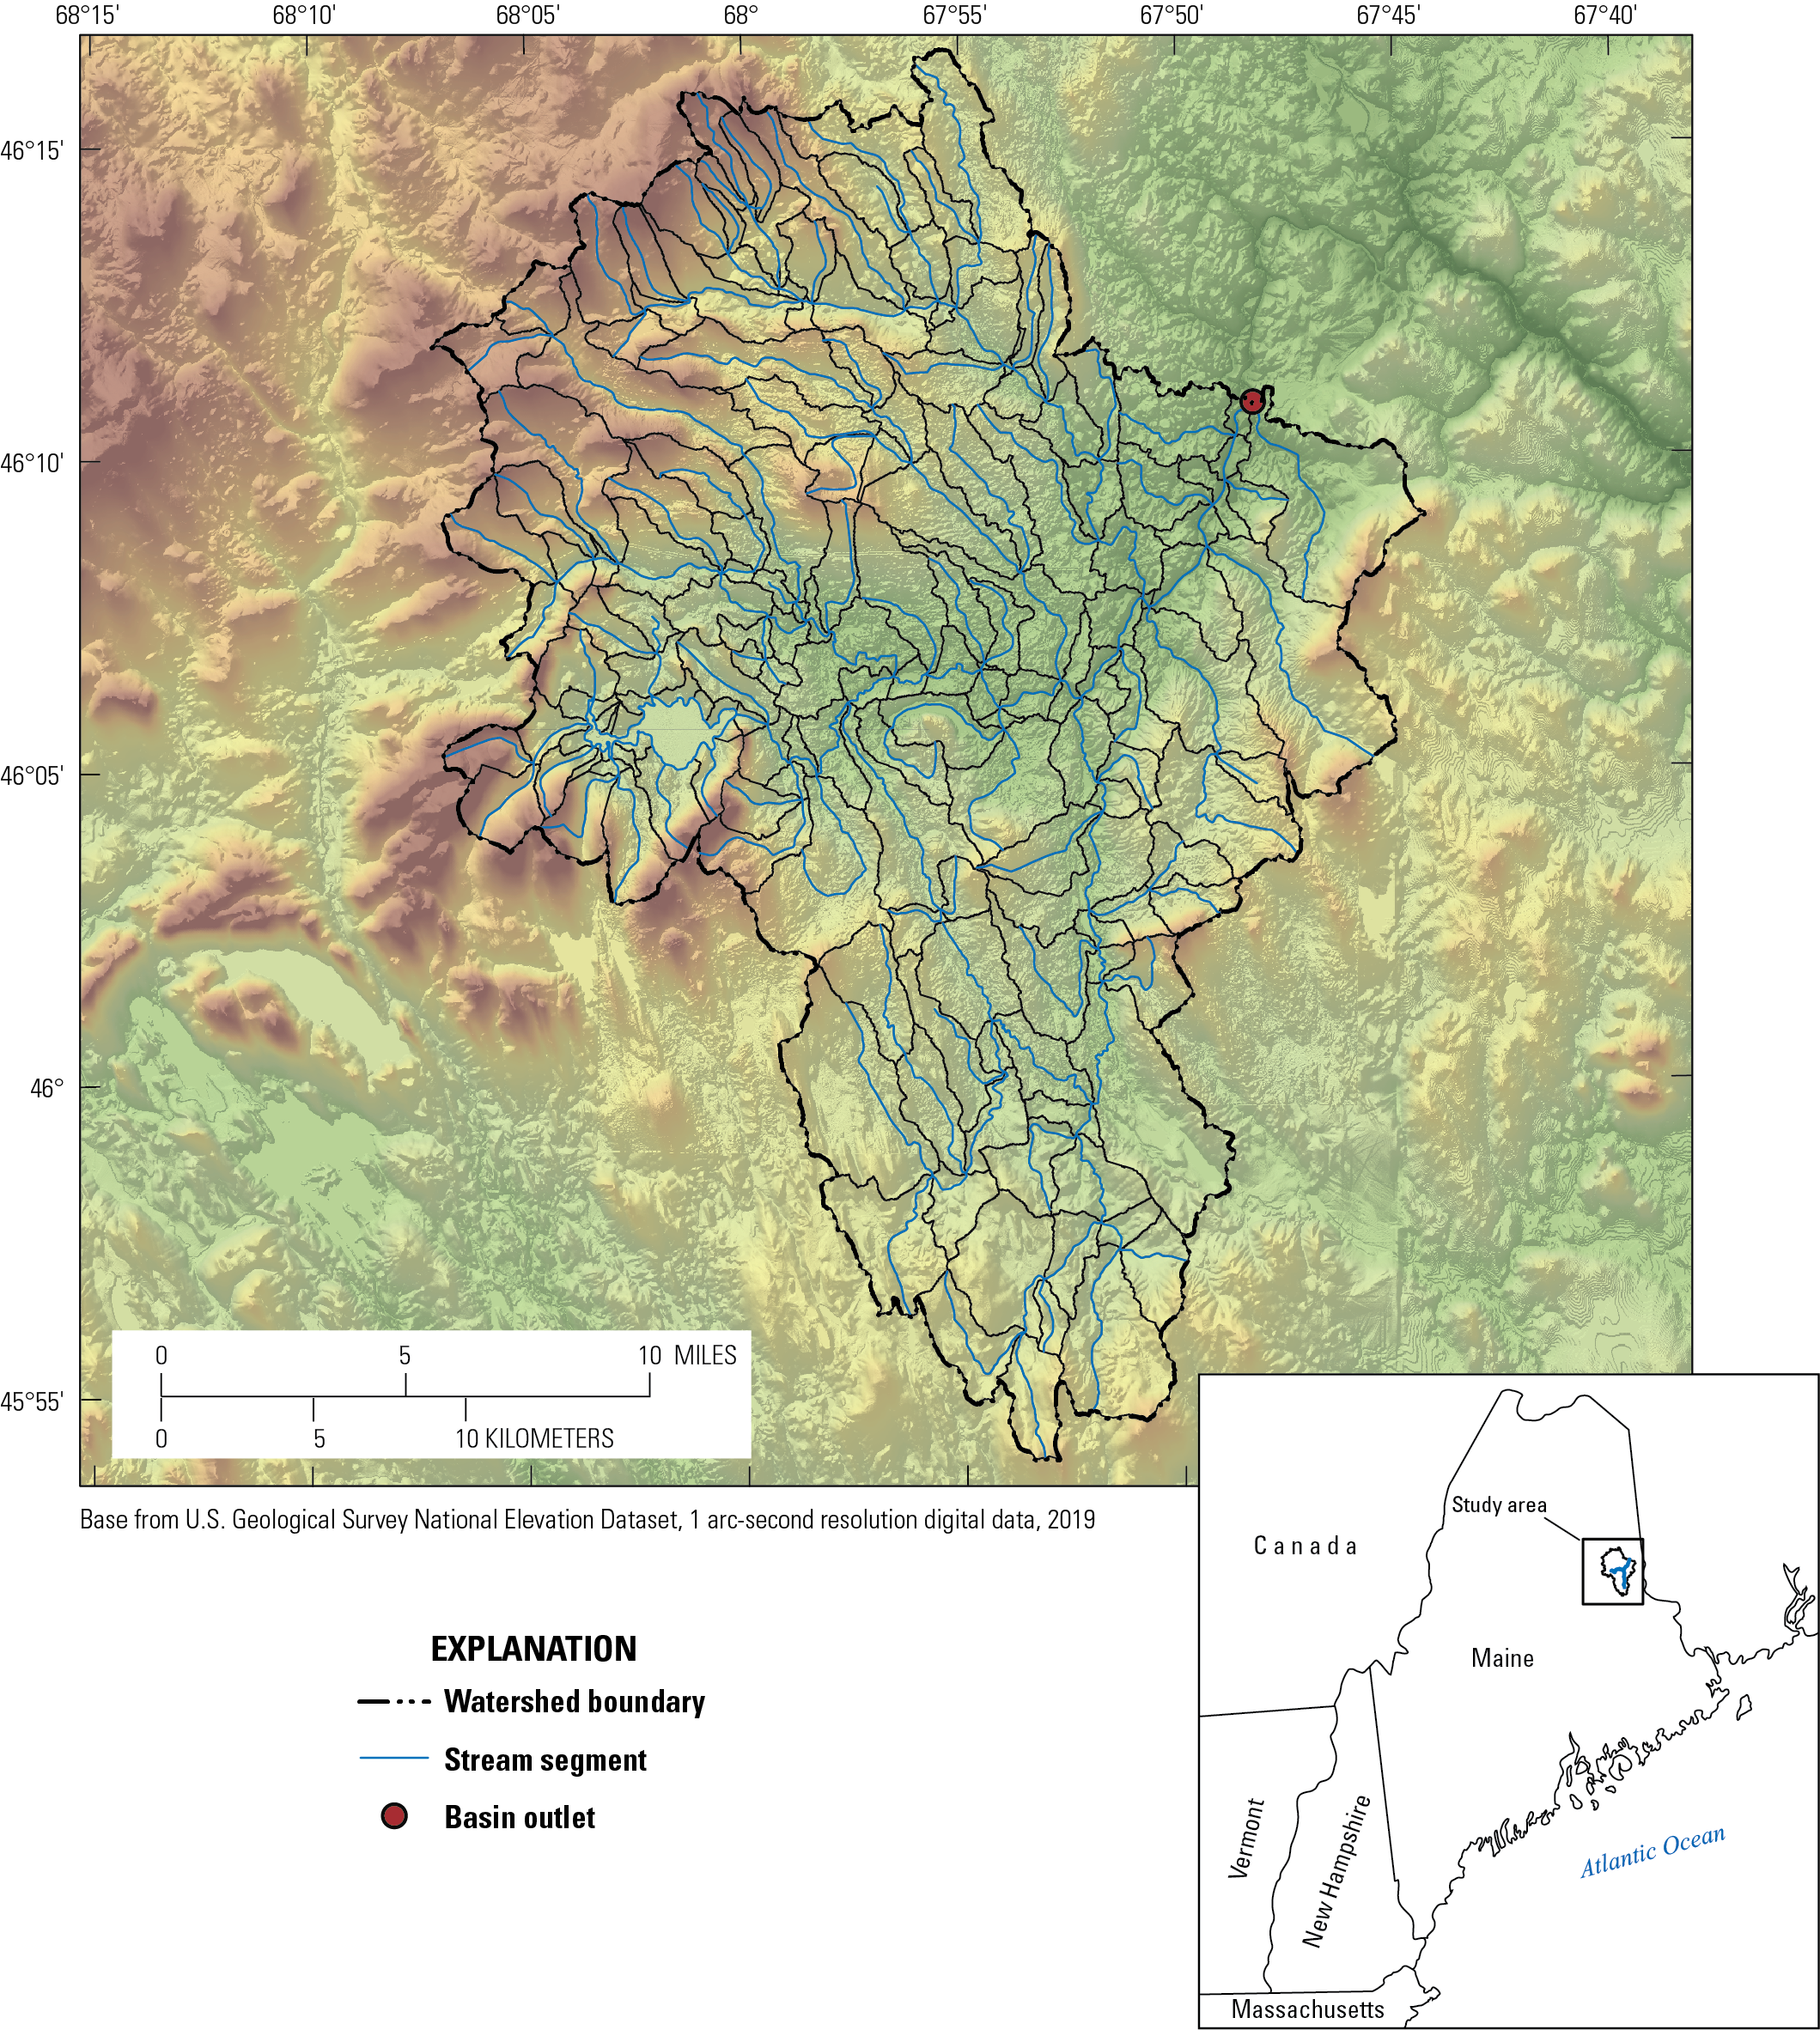 Outlines for the hydrologic response units and streams in the Meduxnekeag River watershed,
                        Maine.